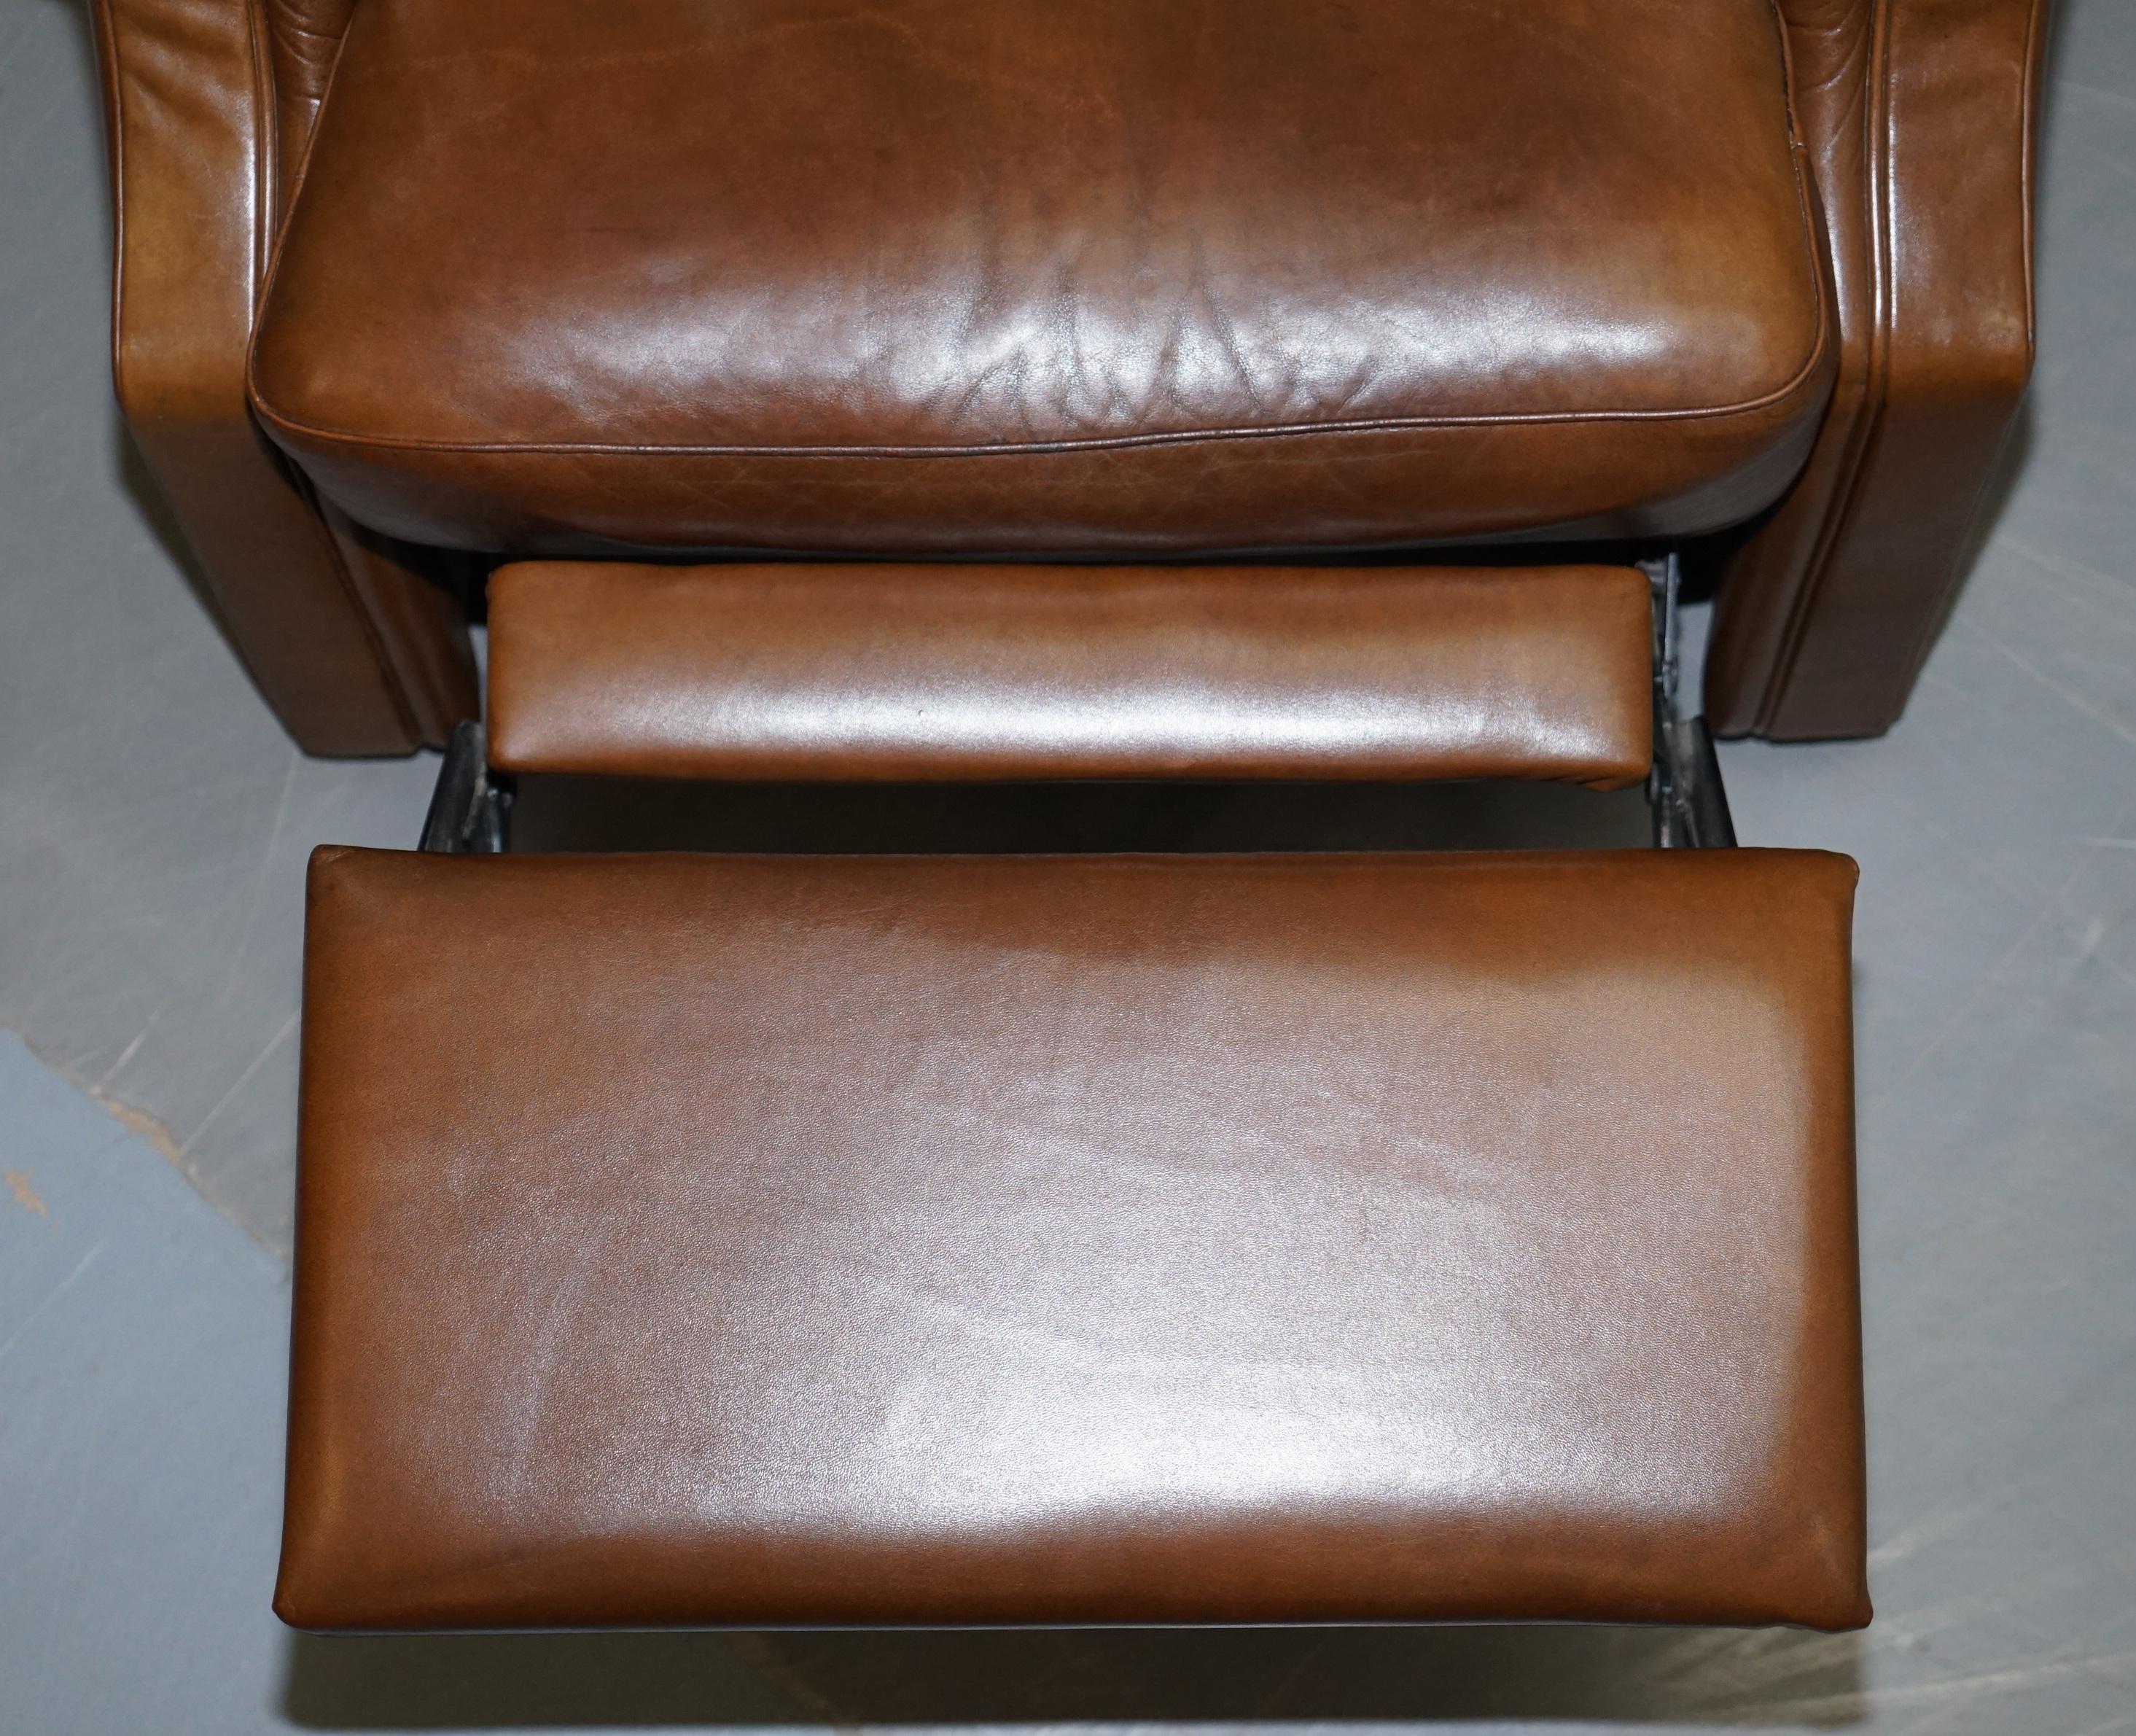 Lovely Tan Brown Leather Chesterfield Electric Relciner Armchair Comfortable!!!! 9